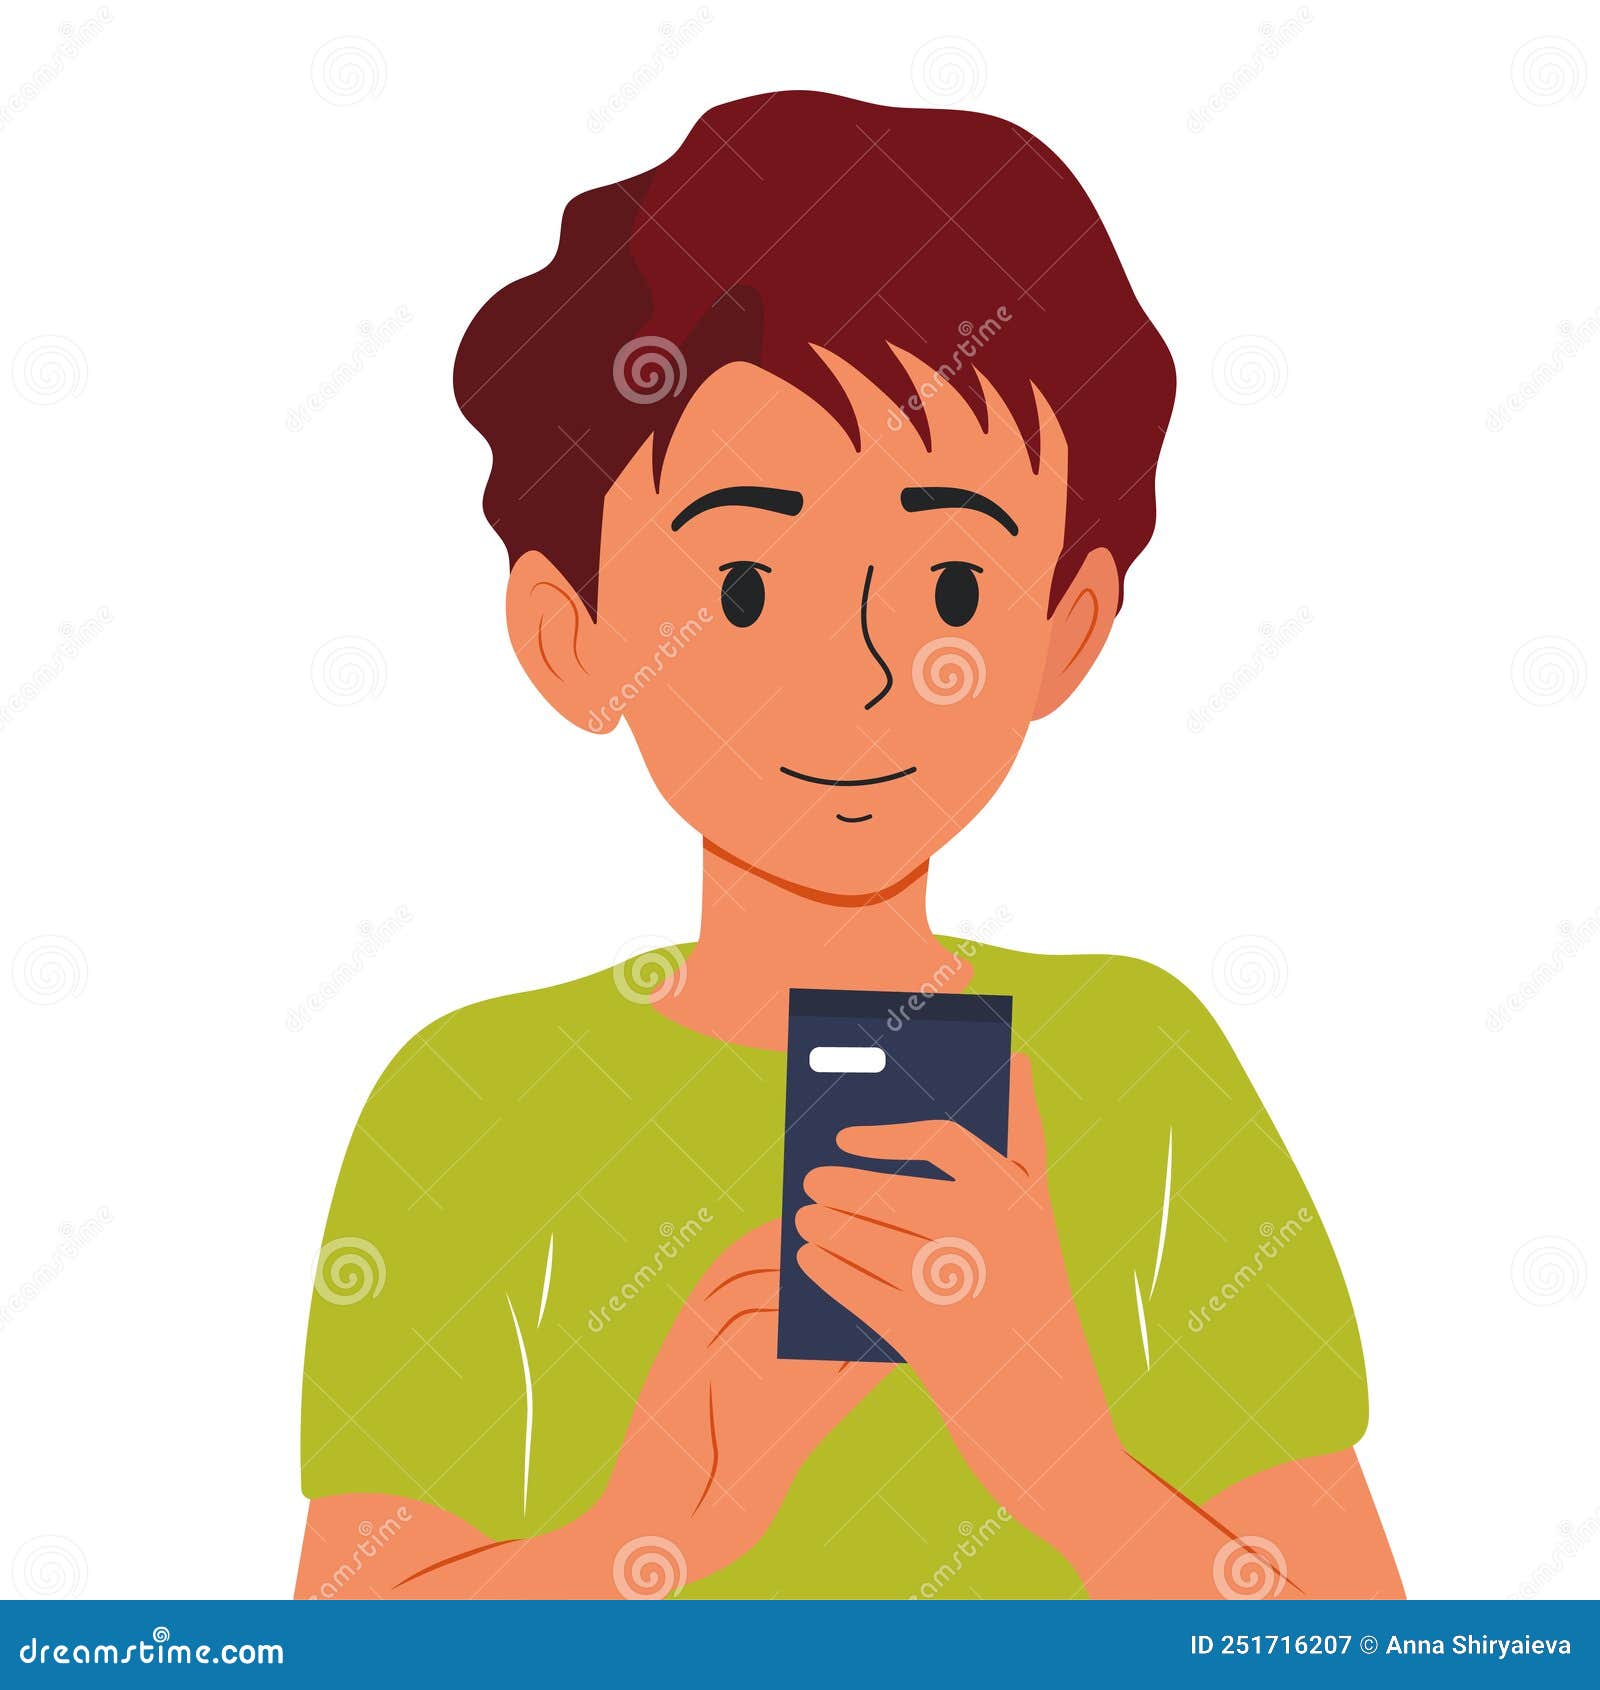 The Boy is Holding a Phone, a Call or a Message in His Hands. Vector ...